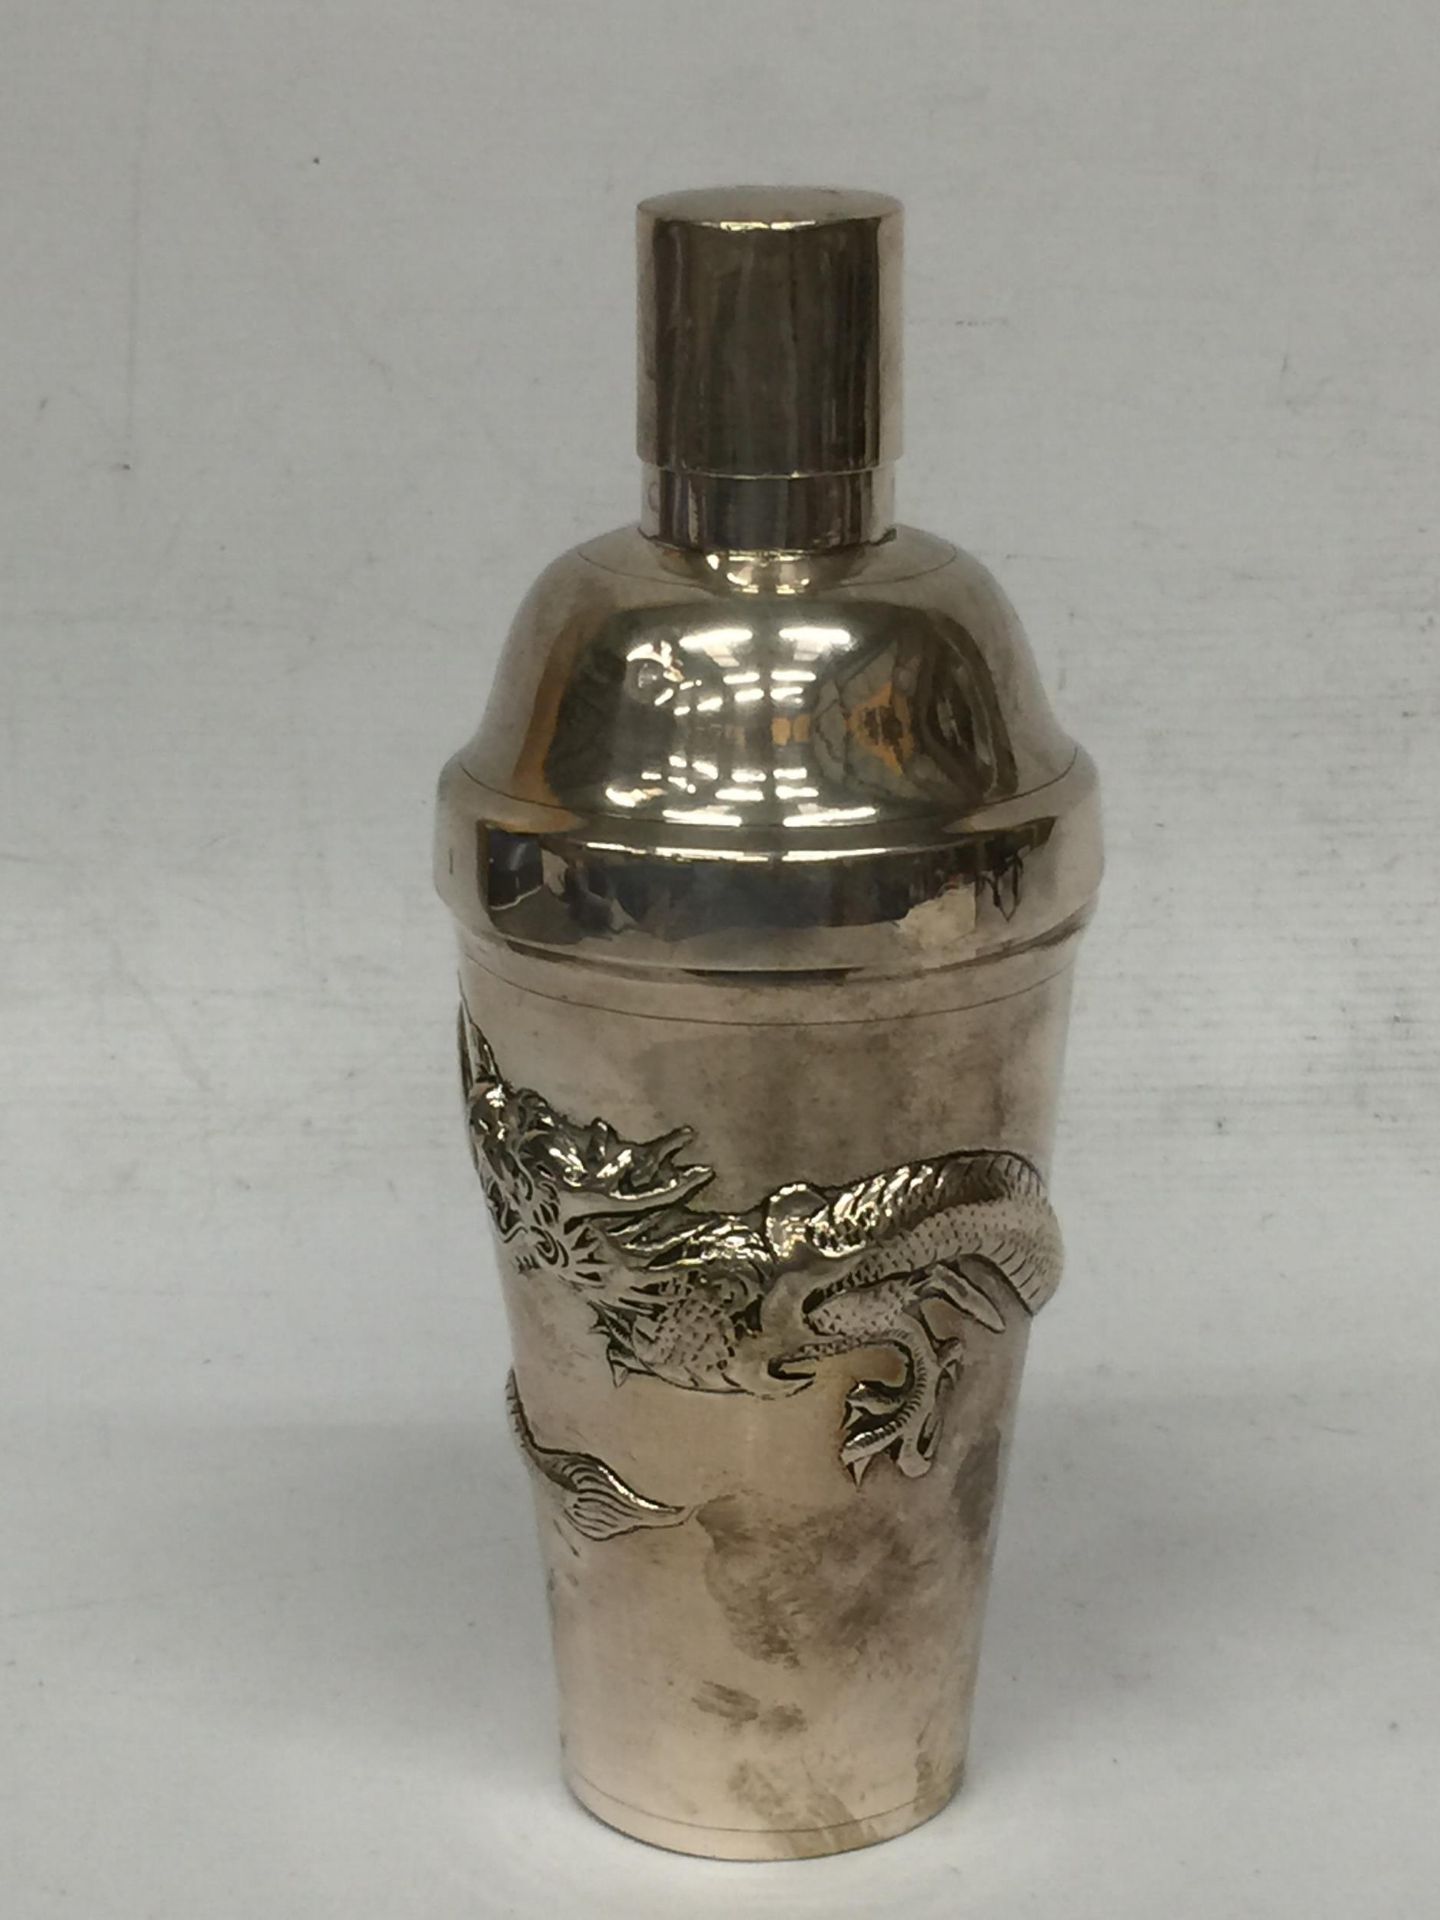 A BELIEVED SILVER CHINESE NANKING COCKTAIL SHAKER WITH DRAGON APPLIED DESIGN - Image 2 of 5